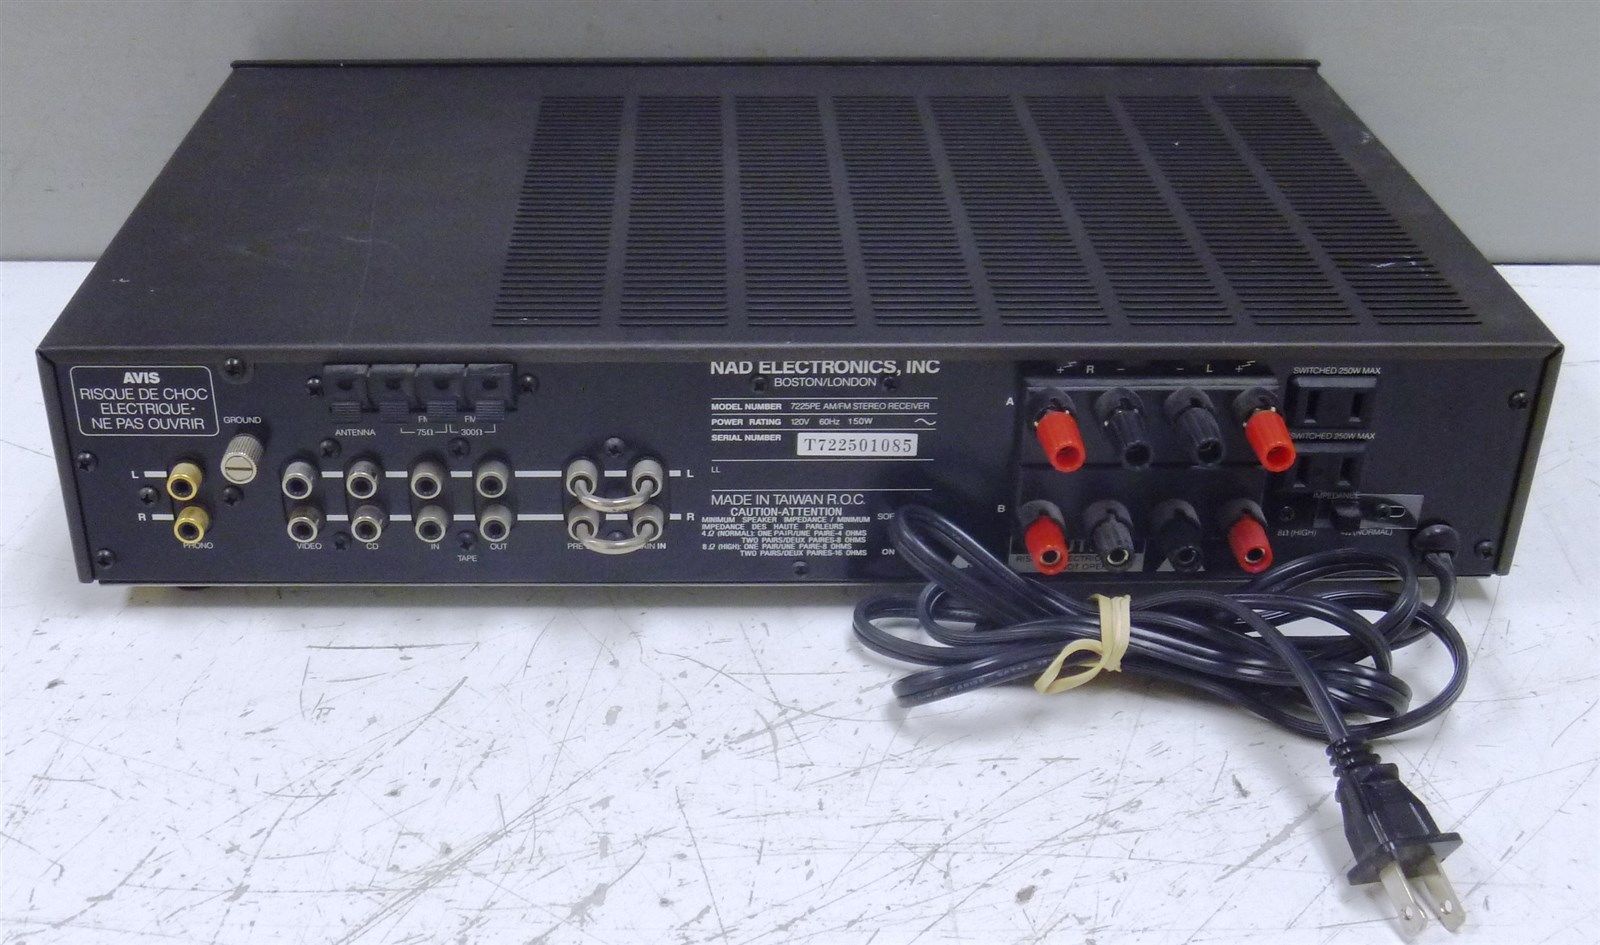 Details on the remarkable PROTON D540 Integrated amp's huge 530 watt